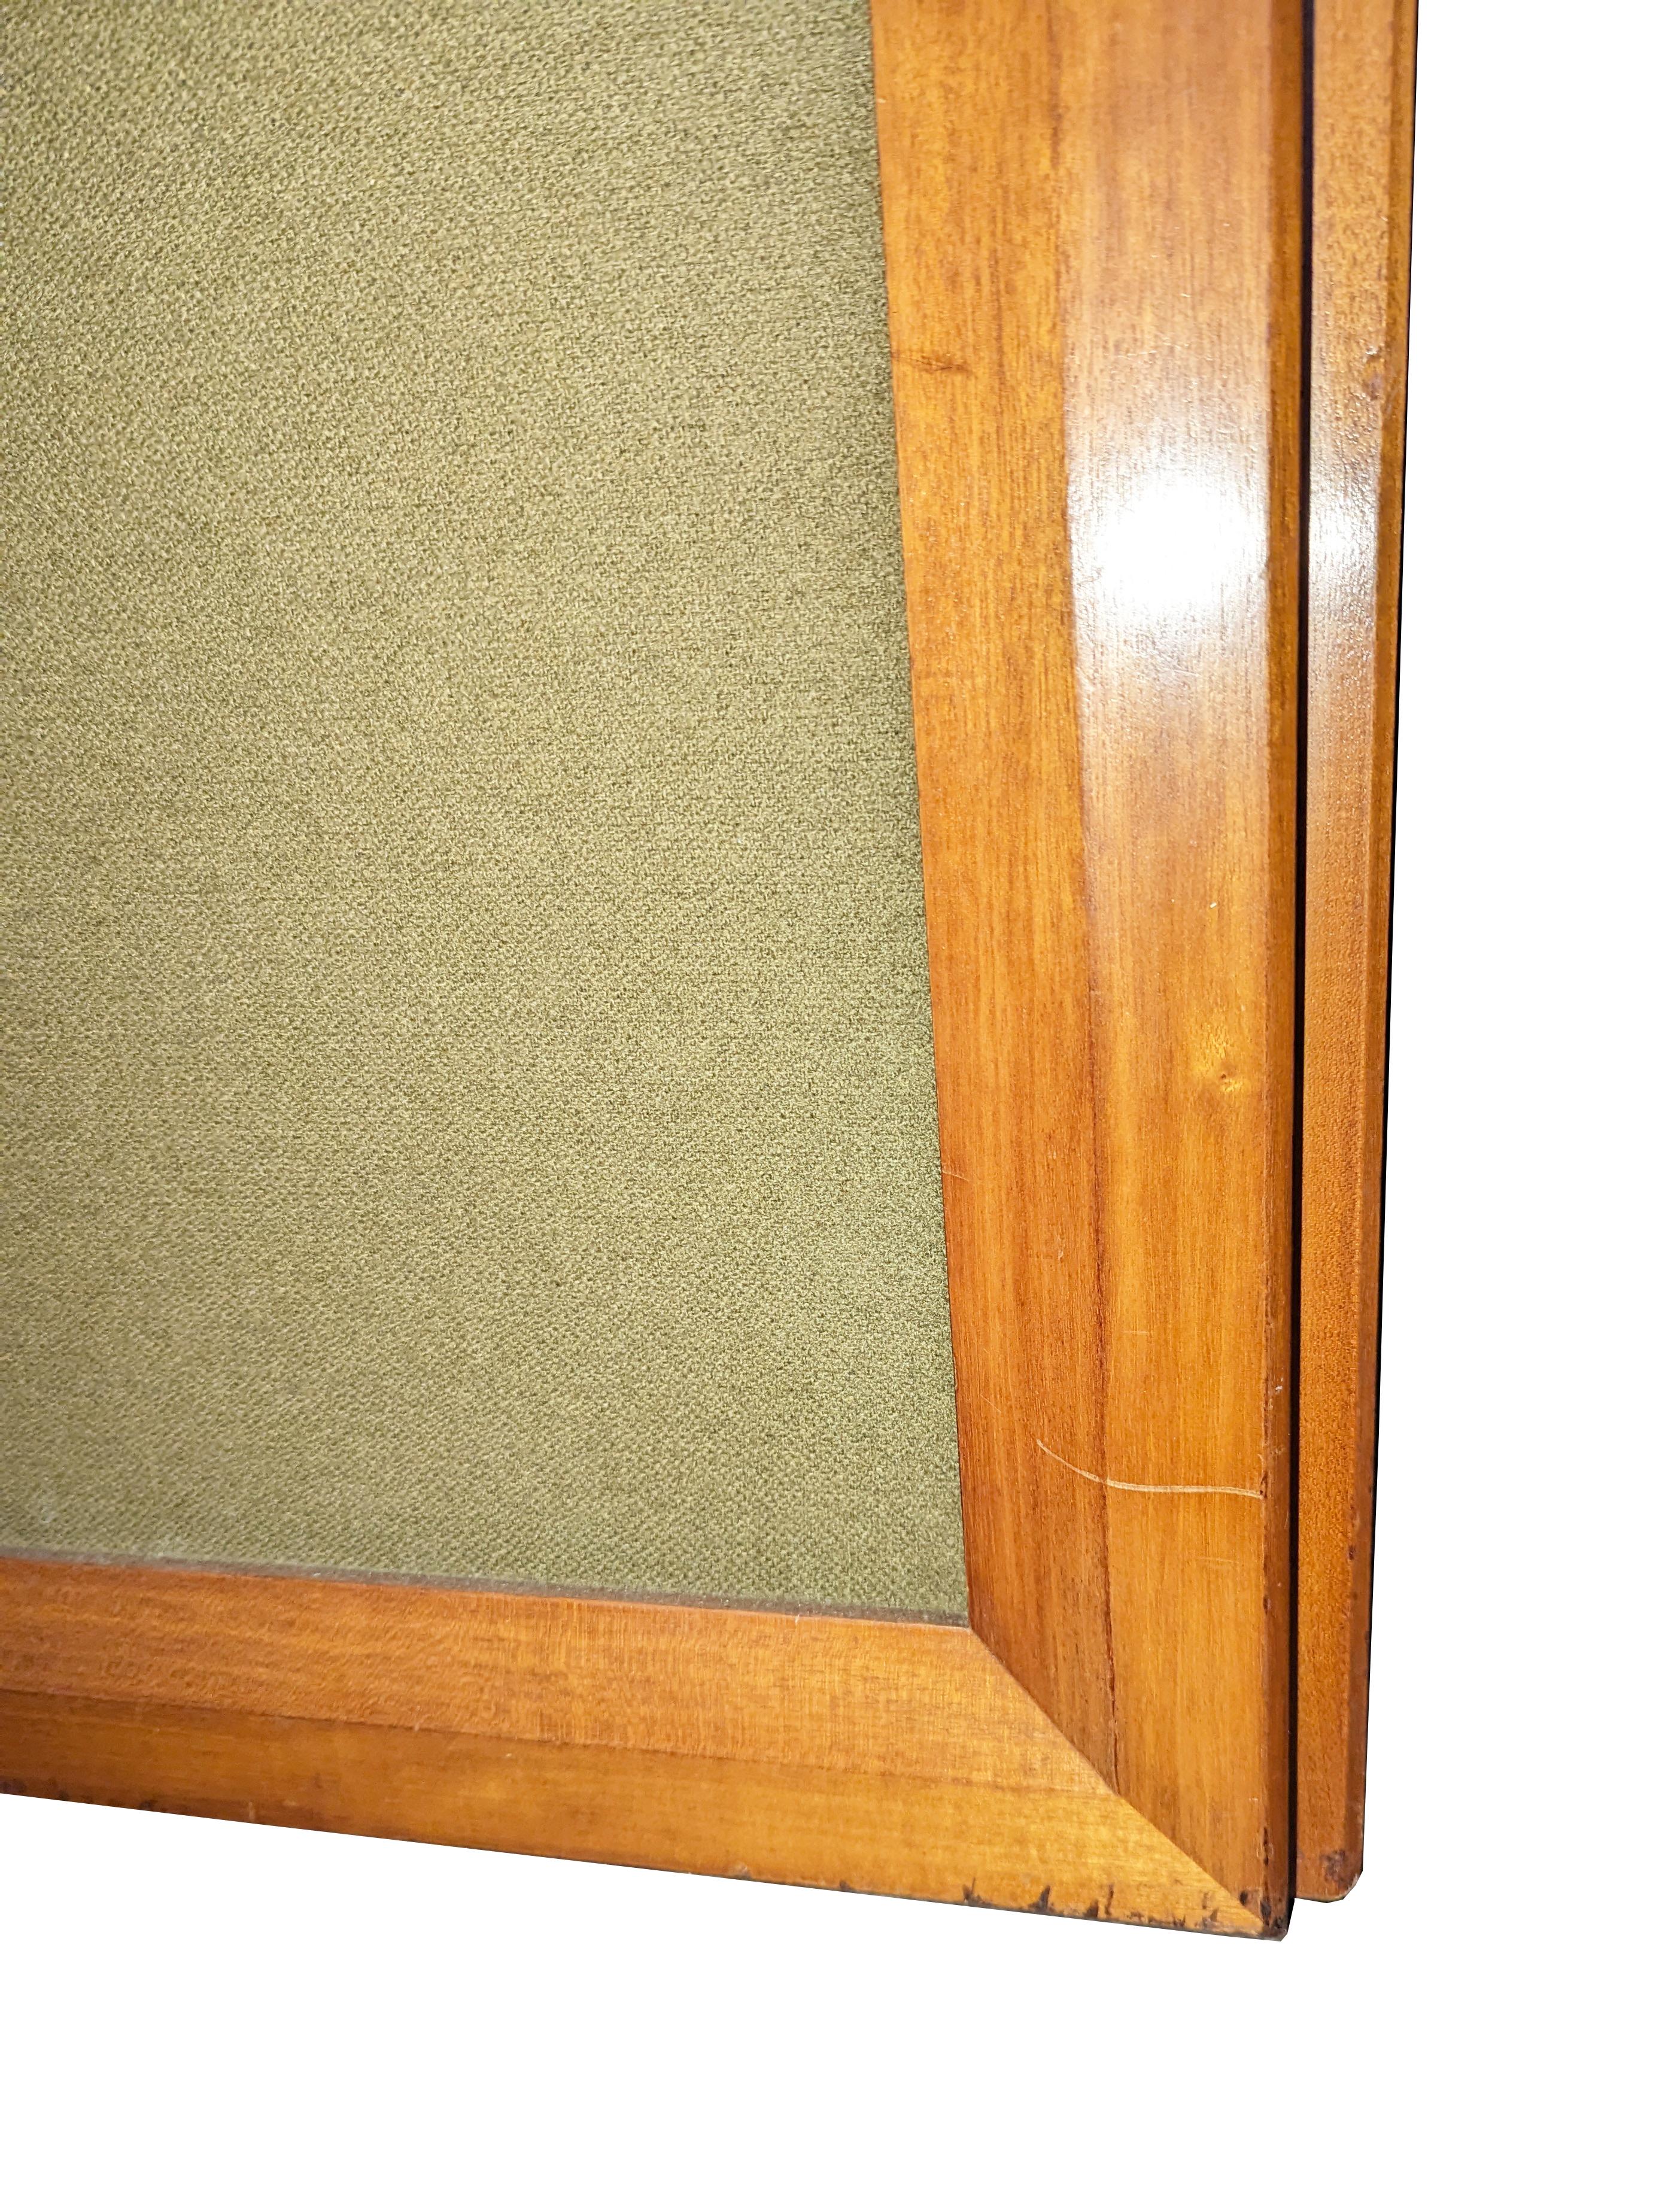 Walnut & olive green fabric 1950s MB 15 Sideboard by Albini & Helg for Poggi For Sale 7